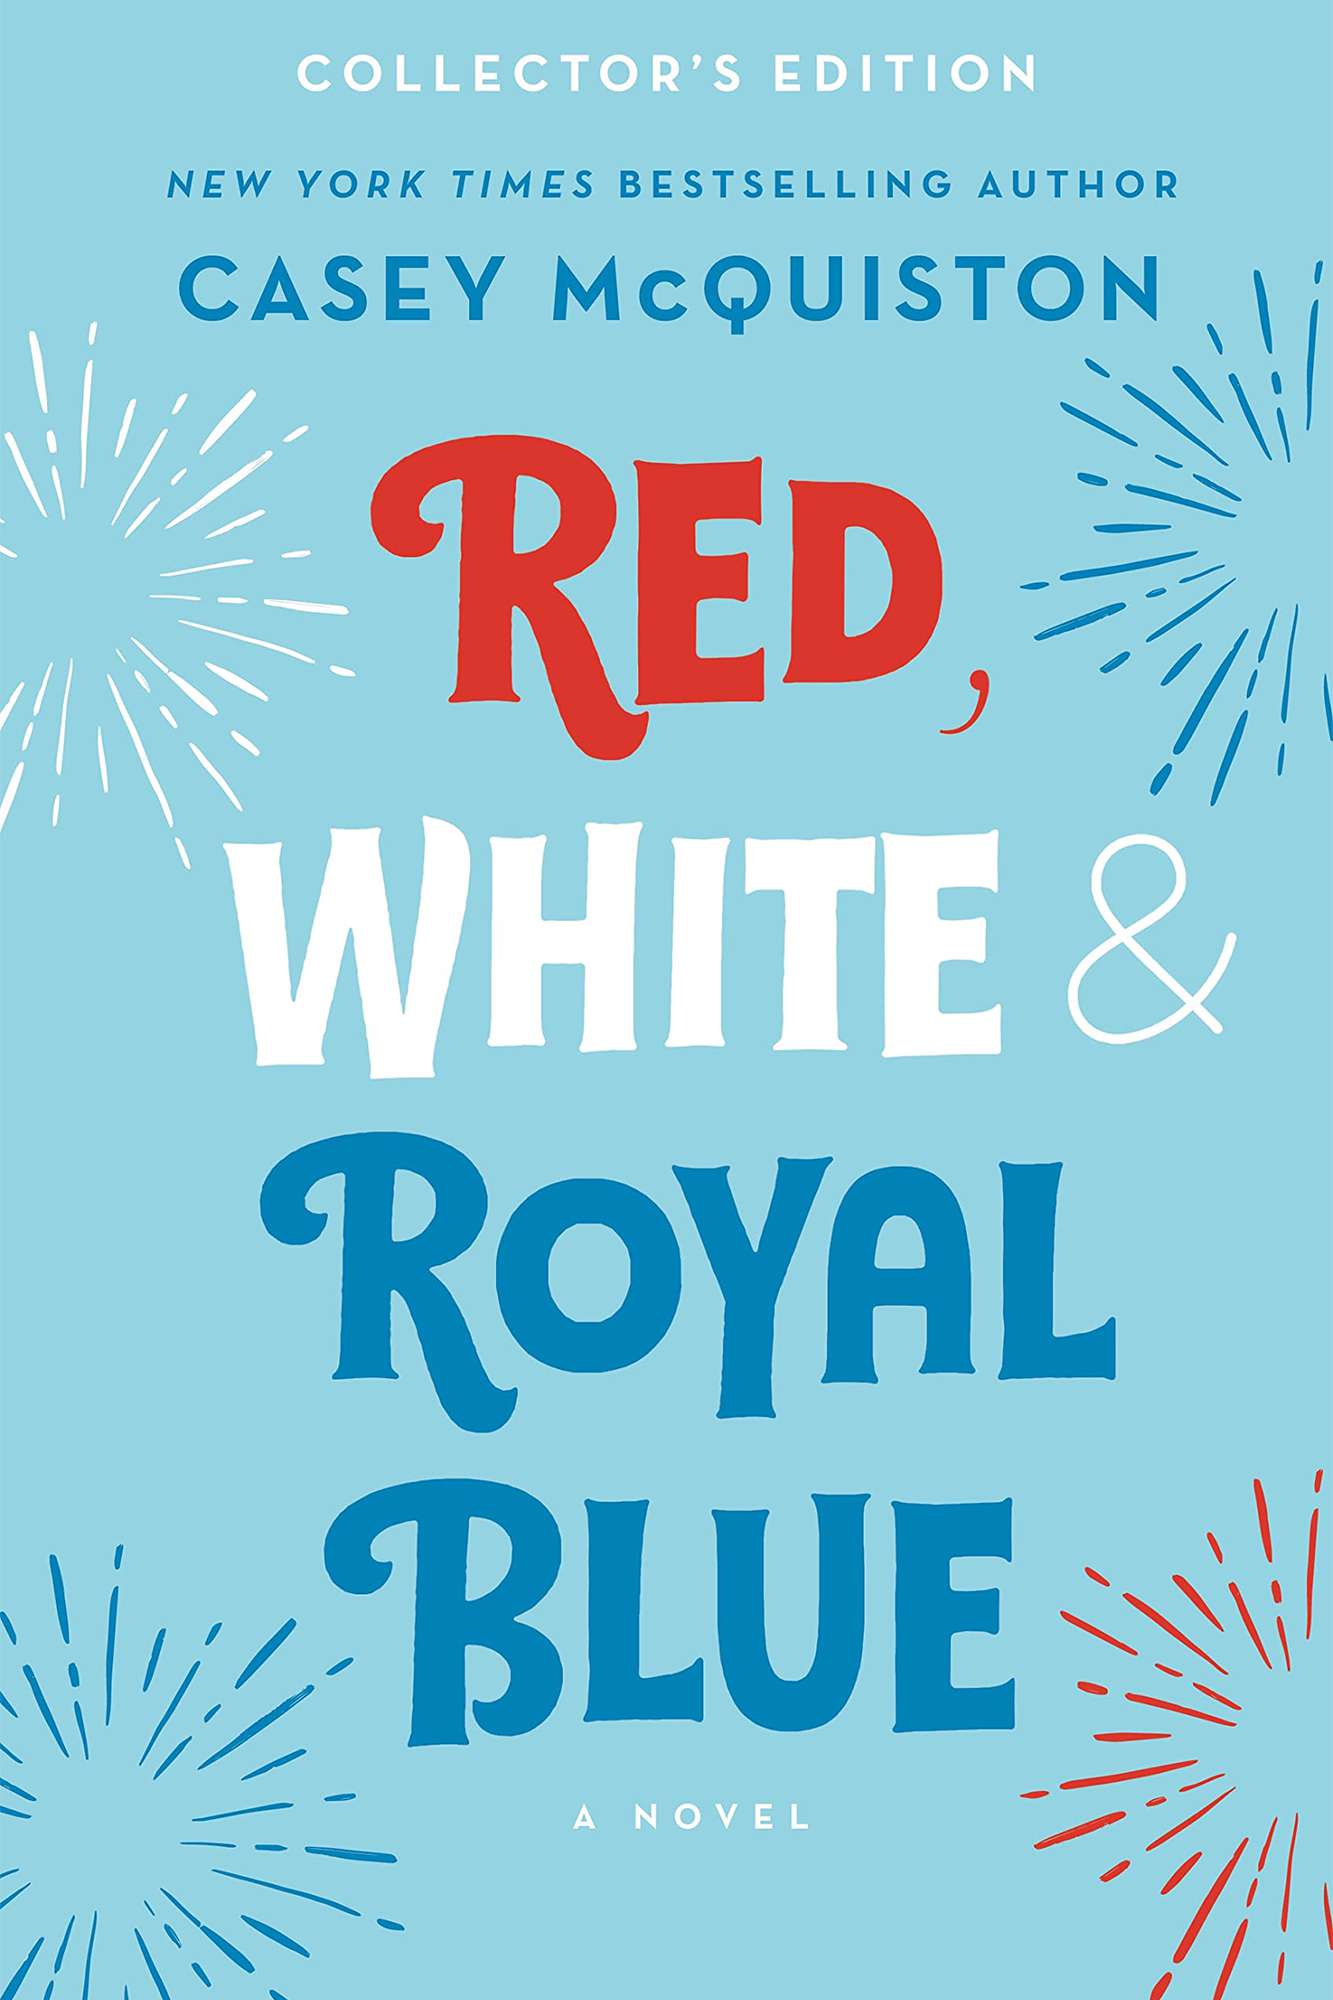 Red, White & Royal Blue: Collector's Edition: A Novel Hardcover – October 11, 2022 by Casey McQuiston